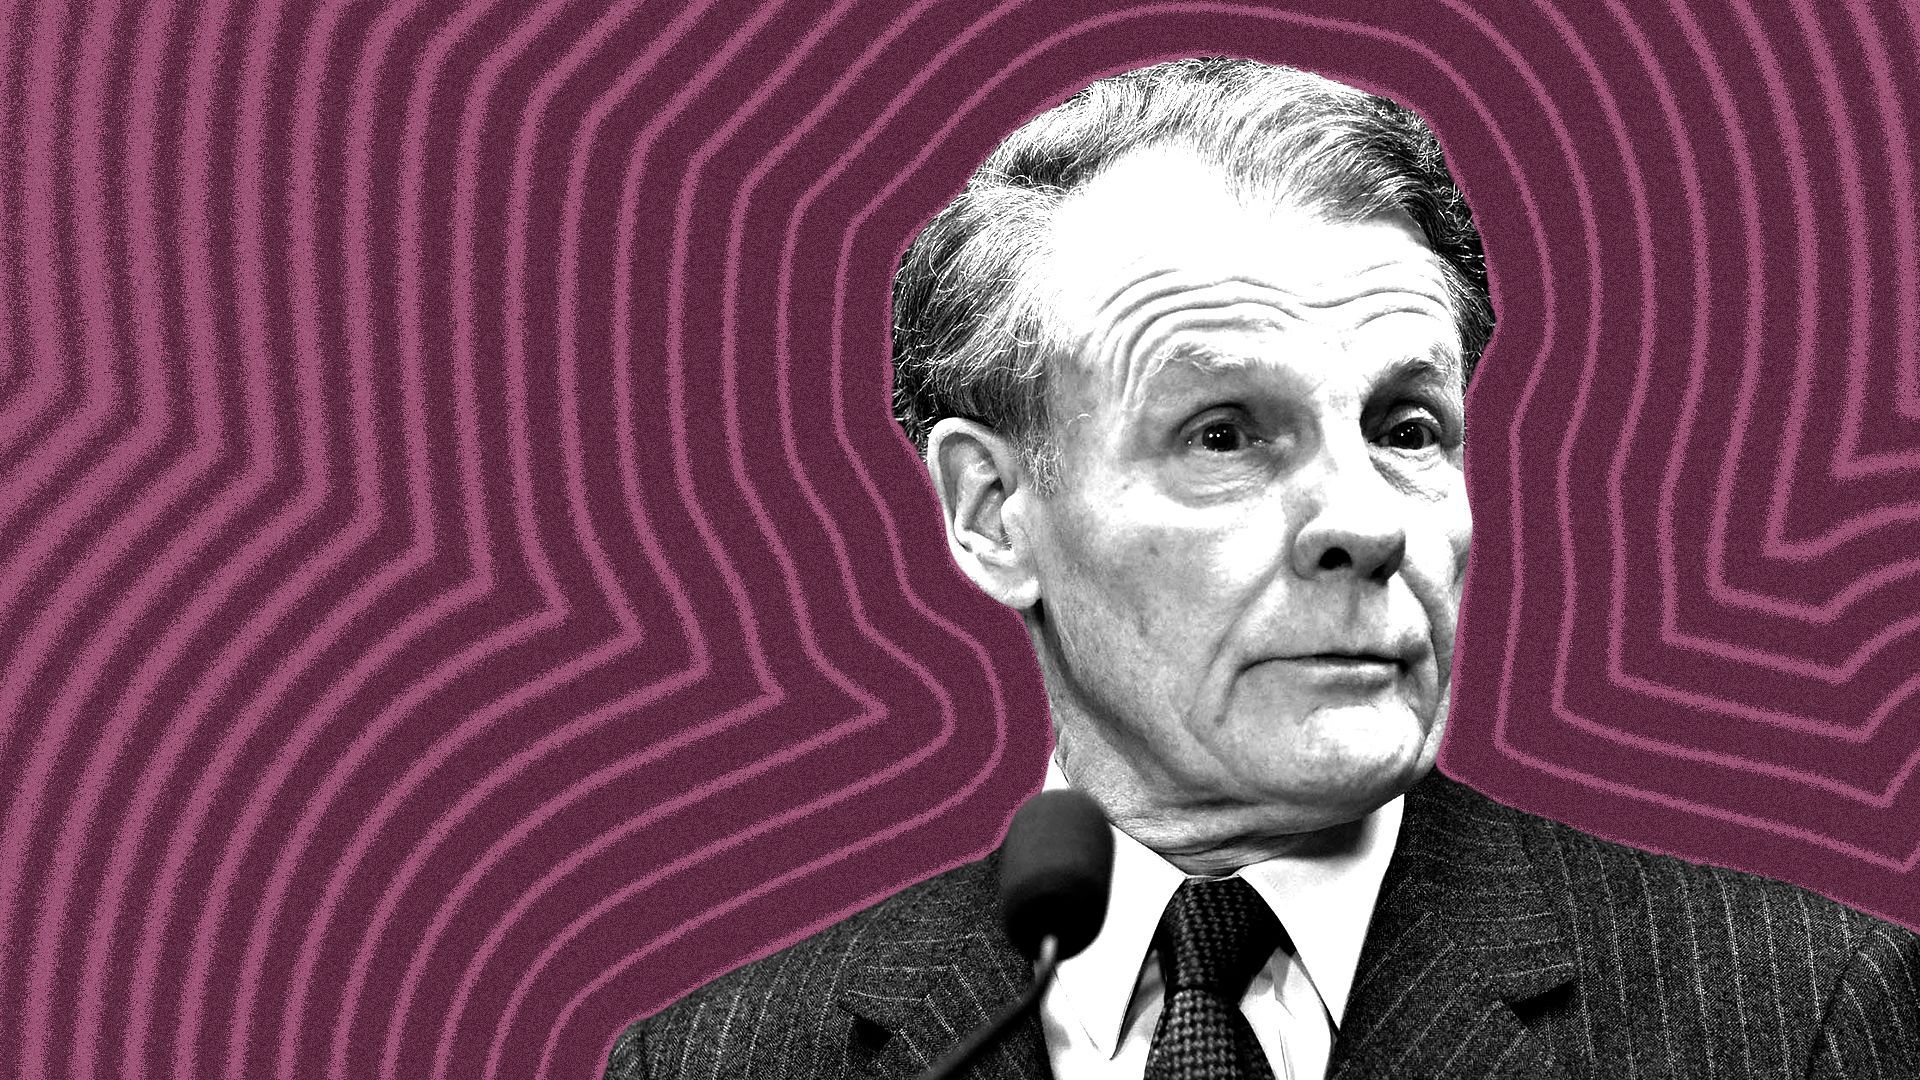 Photo illustration of Michael Madigan with lines radiating from him.